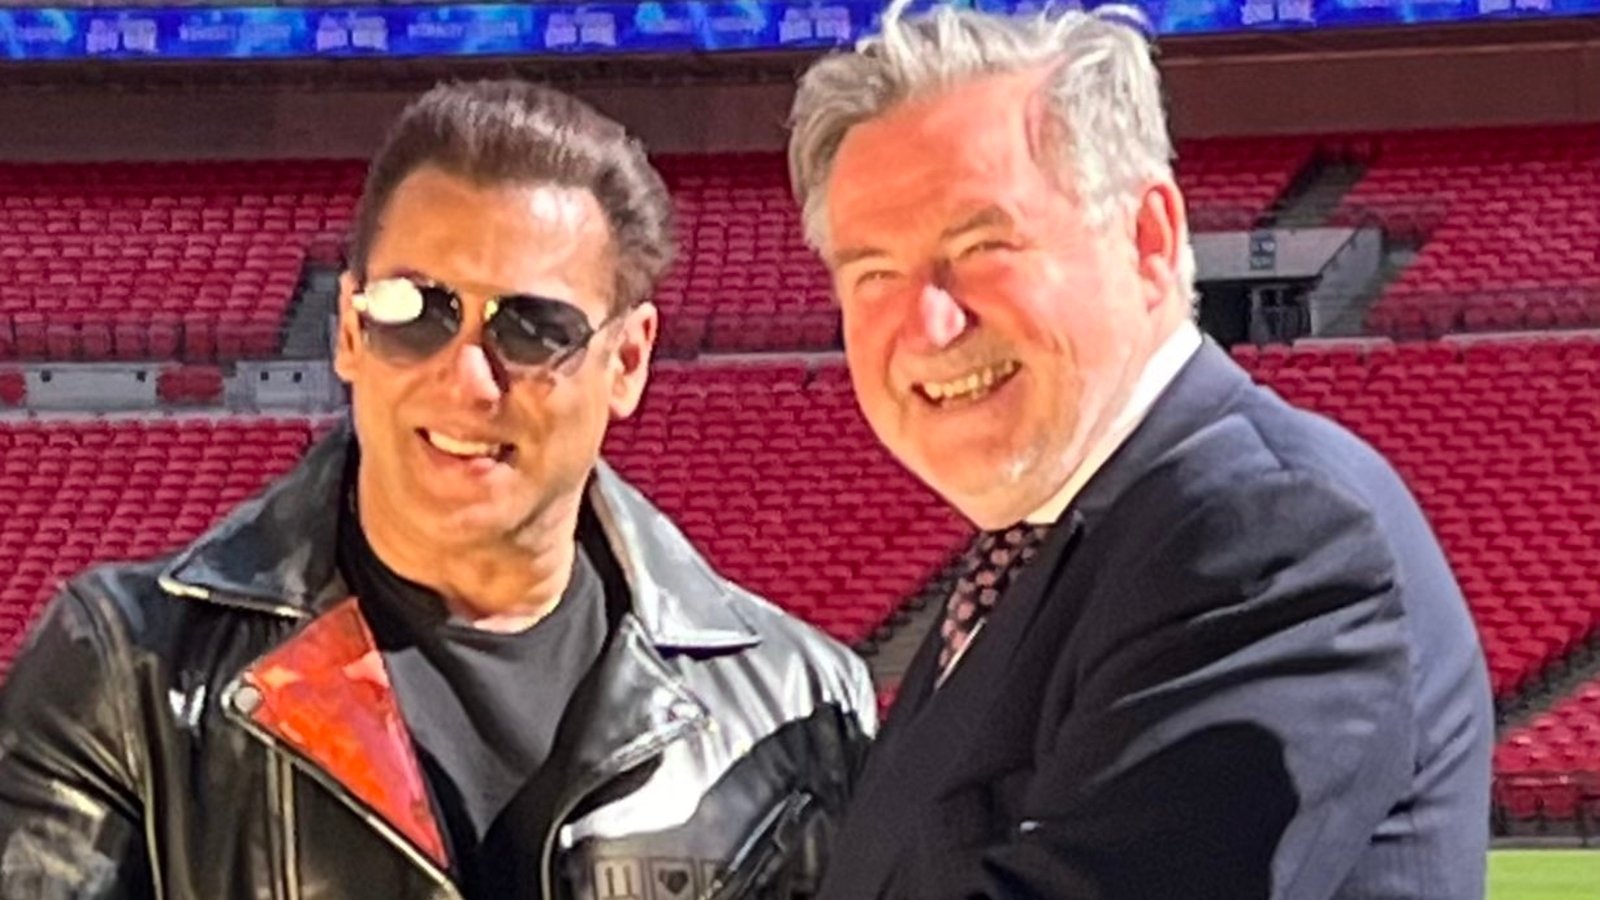 Salman Khan went to London a few weeks after a scary incident happened outside his house. He took a picture with UK MP Barry Gardiner in Wembley.